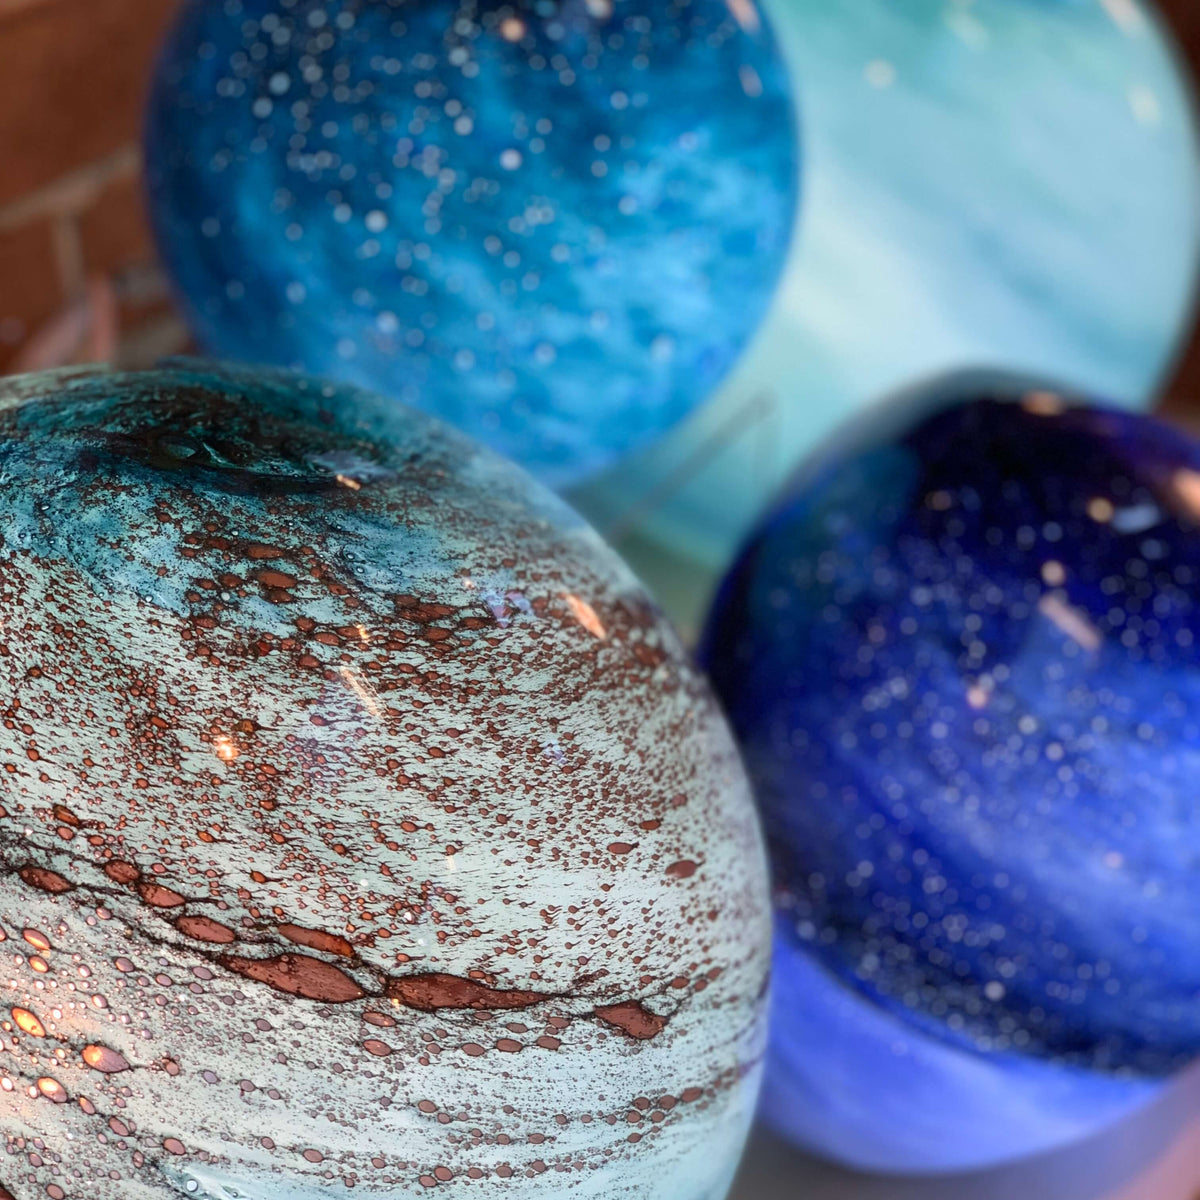 A cluster of our blown glass orb lights, handmade with planet like colouring and a smooth surface. Available at Ferrers Gallery.